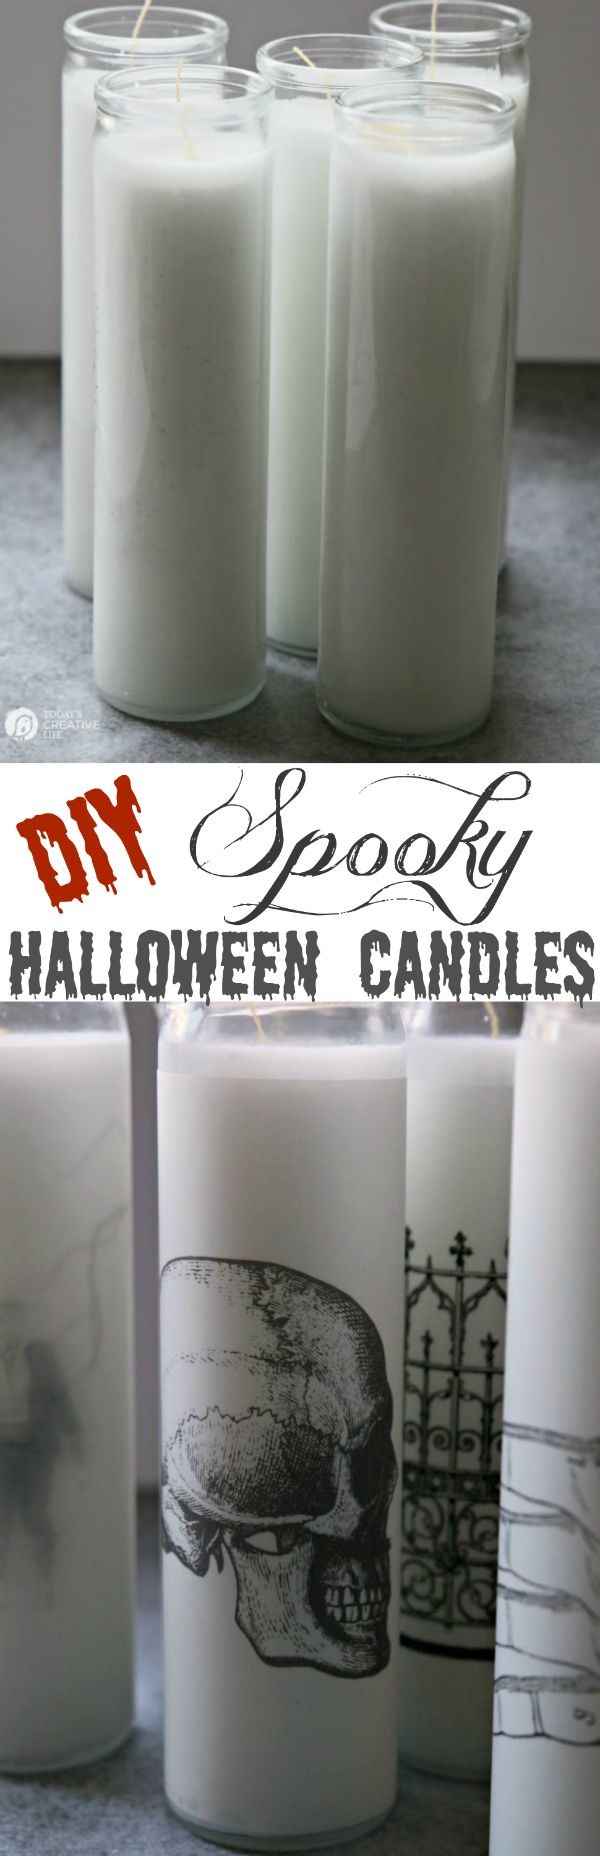 DIY Spooky Halloween Candles | Make simple Halloween Decor in minutes! Easy Halloween Table Centerpiece from TodaysCreativeLife.com